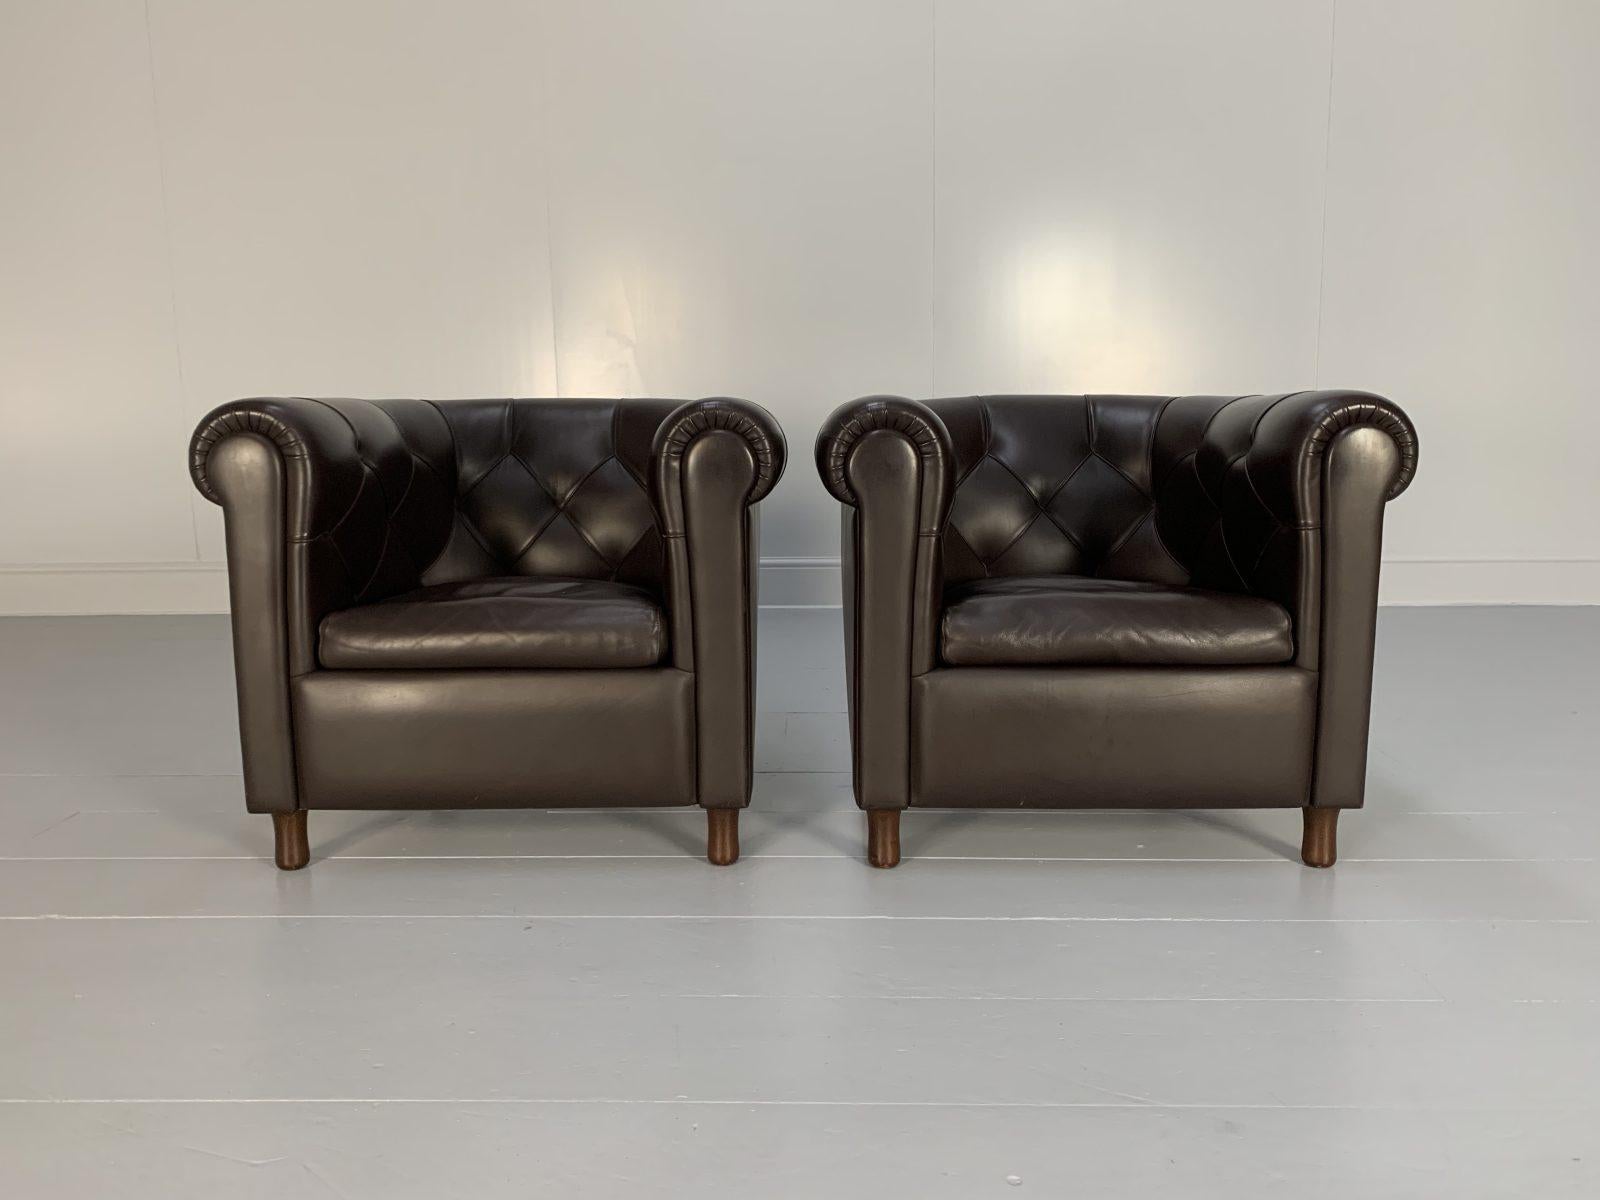 Hello Friends, and welcome to another unmissable offering from Lord Browns Furniture, the UK’s premier resource for fine Sofas and Chairs.

On offer on this occasion is a rare, identical pair of “Arcadia” Armchairs (one of 3 pairs available